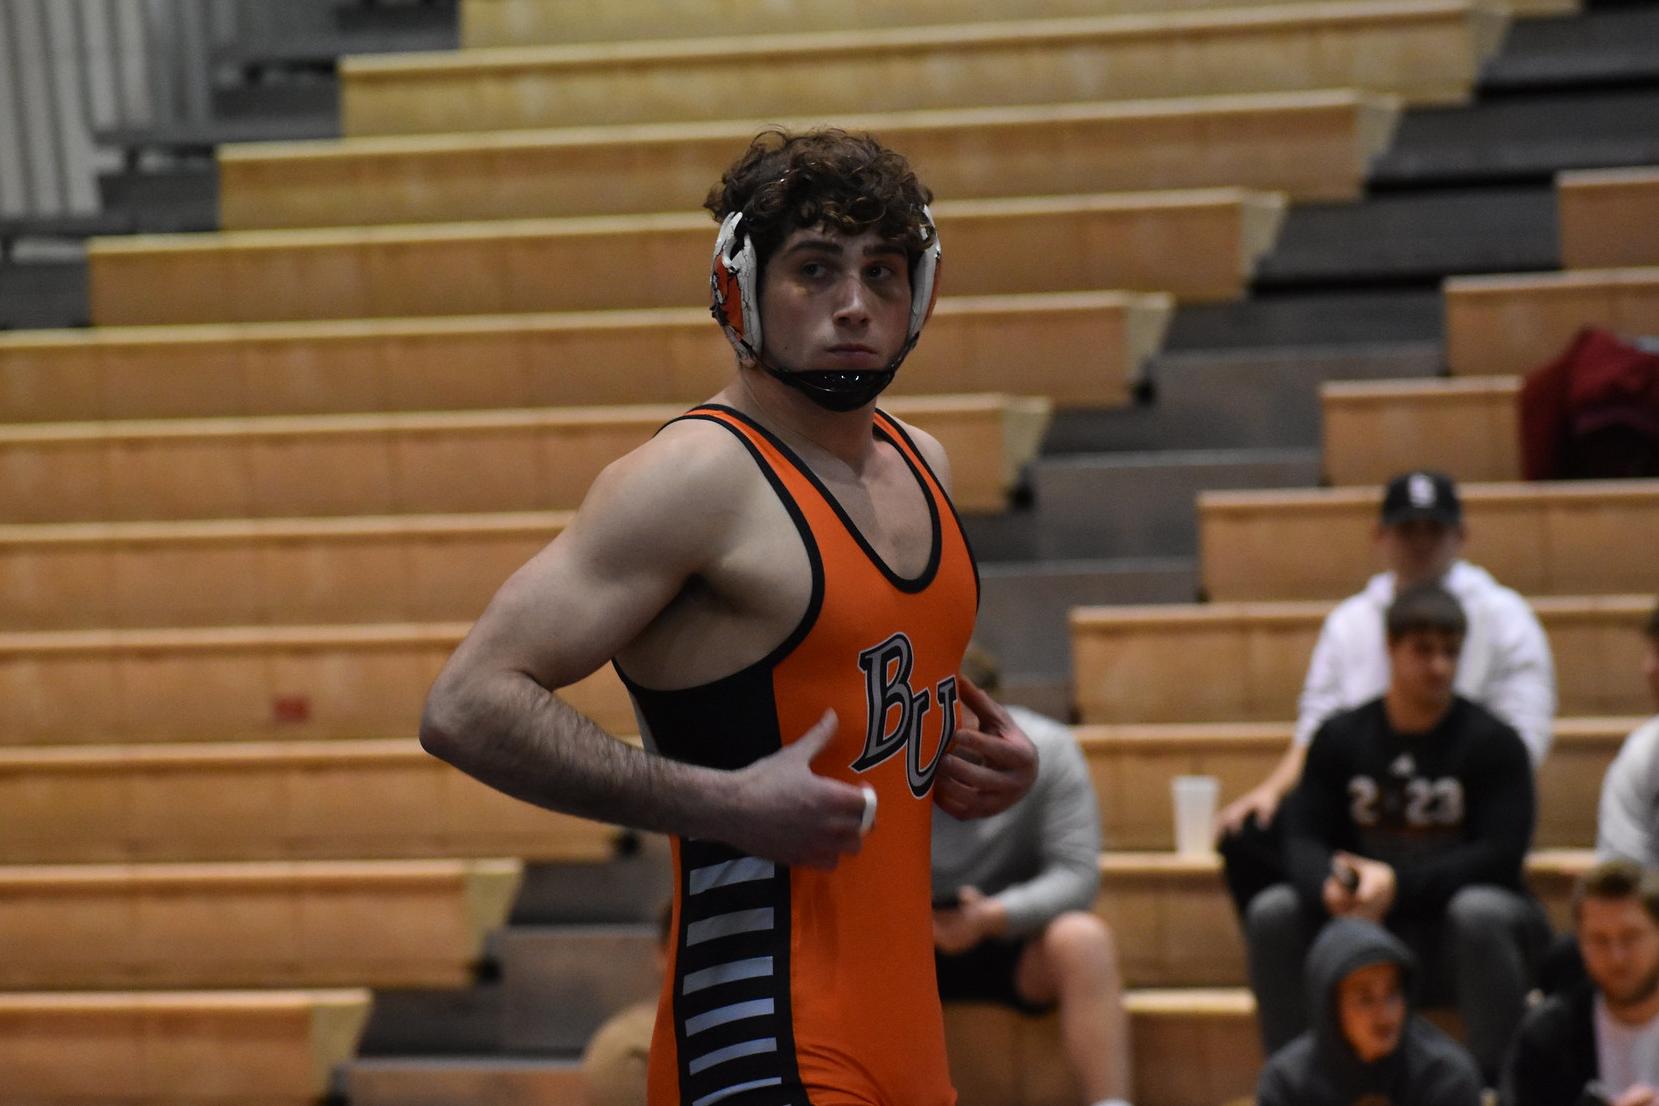 Tiebreaker Gives Yellowjackets, 26-25 Win over Wildcats in Heart Dual